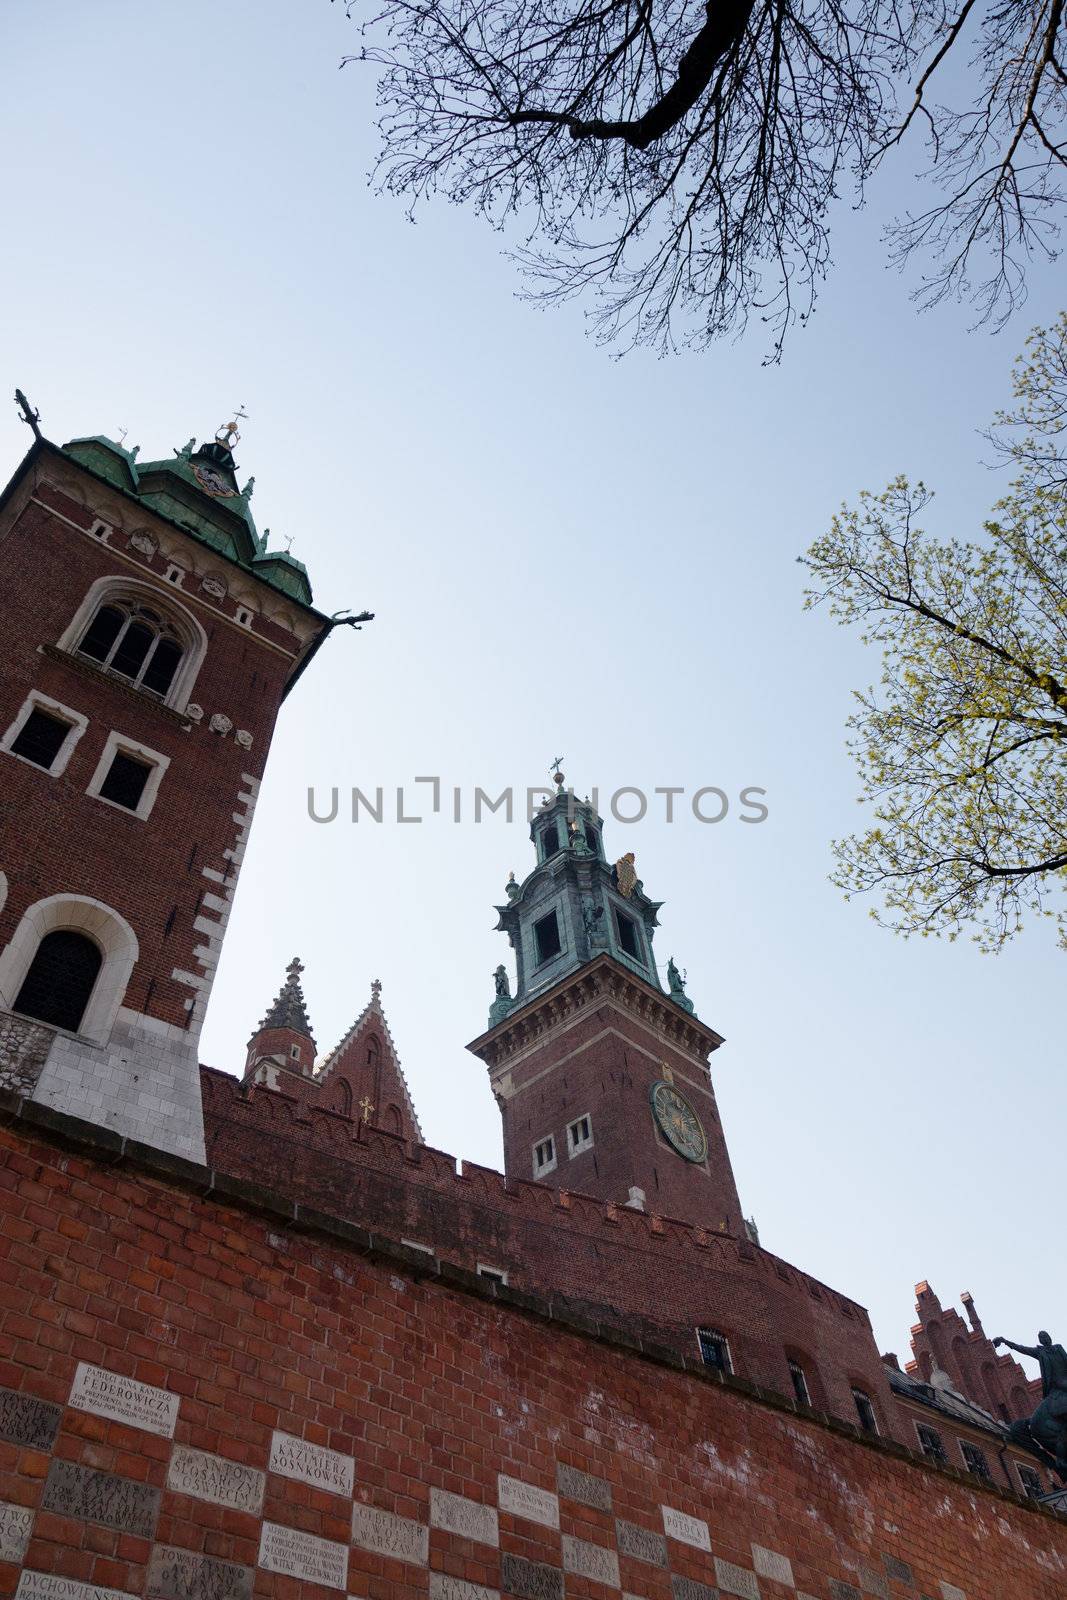 The Gothic Wawel Castle in Cracow in Poland was built at the behest of Casimir III the Great